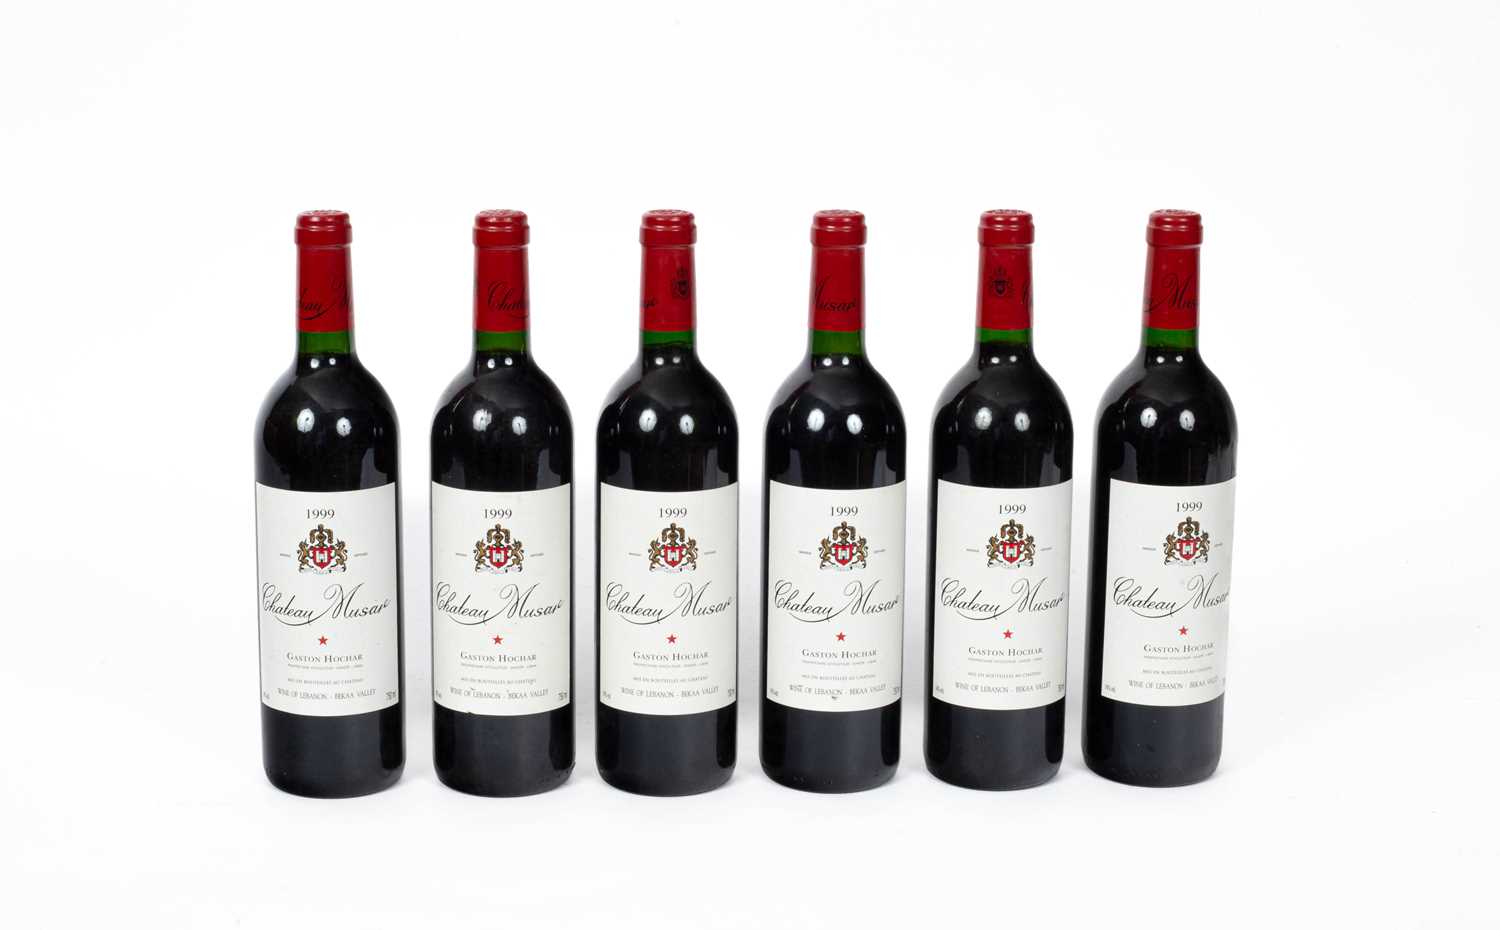 Chateau Musar 1999